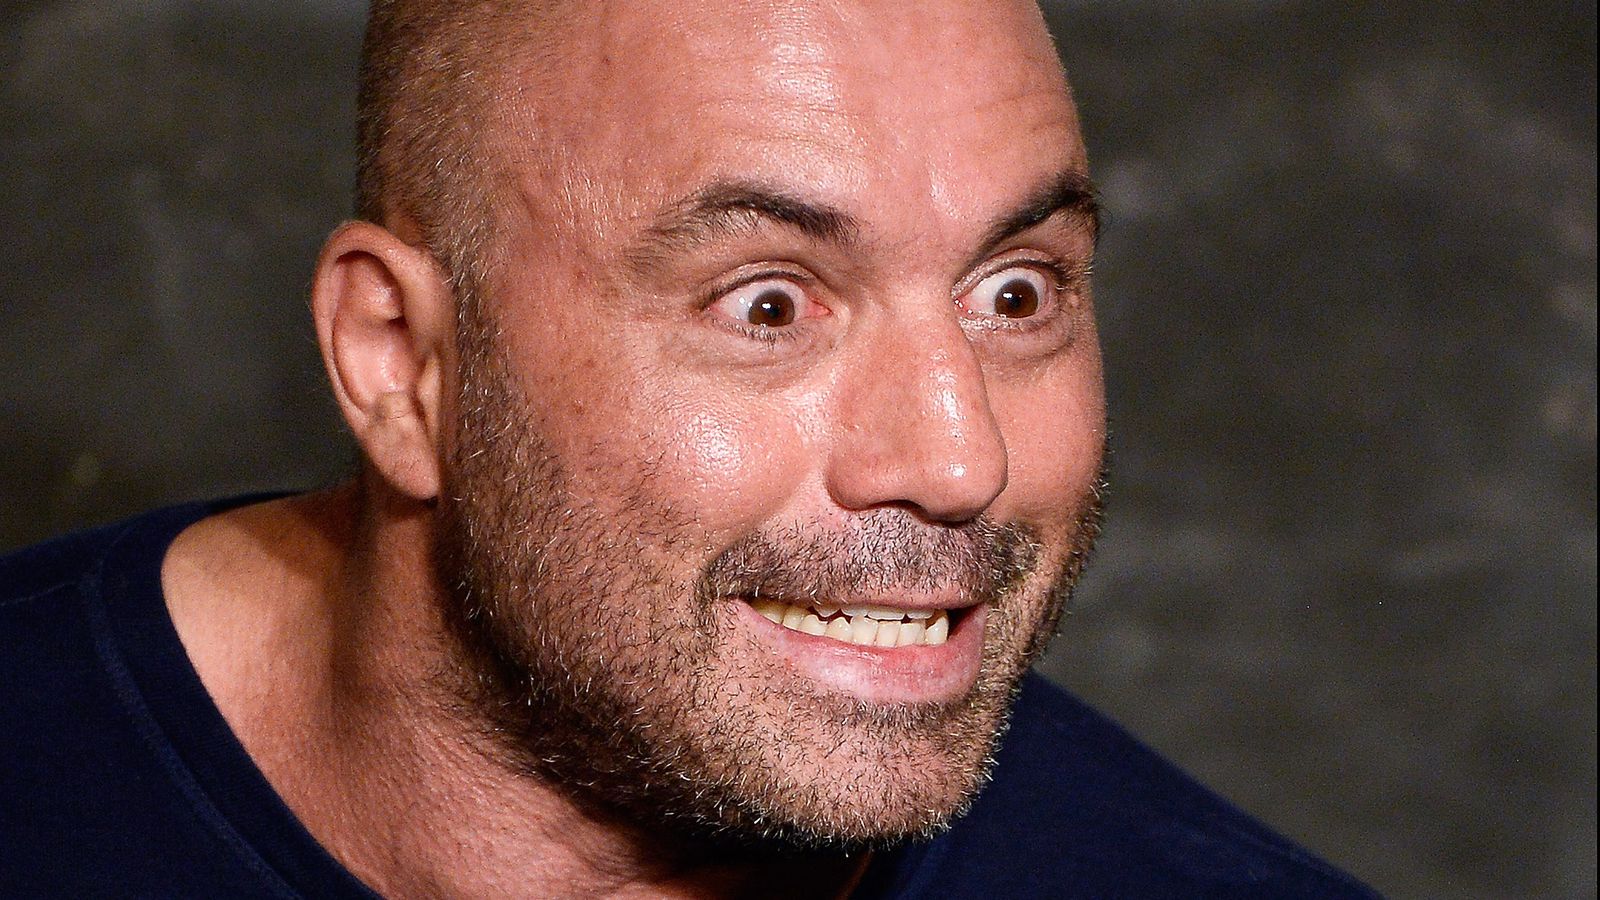 Midnight Mania! Rogan Wants To Legalize Life-Threatening Technique